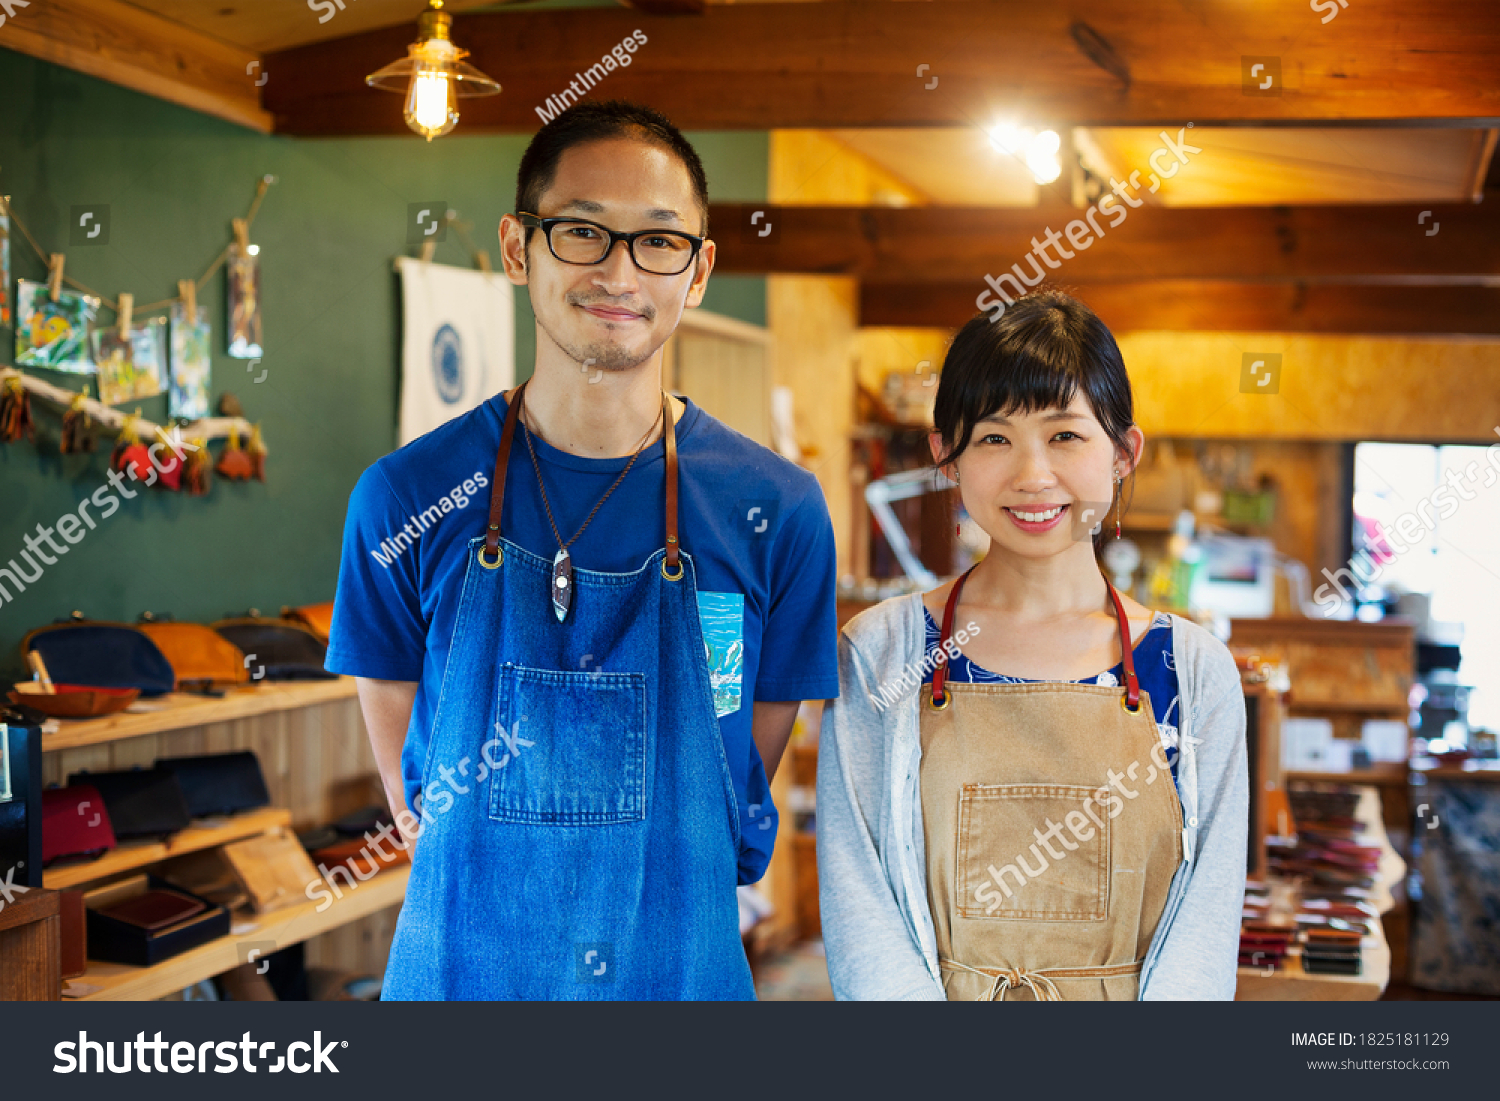 Japanese woman and man wearing blue apron standing in a leather shop, smiling at camera. #1825181129